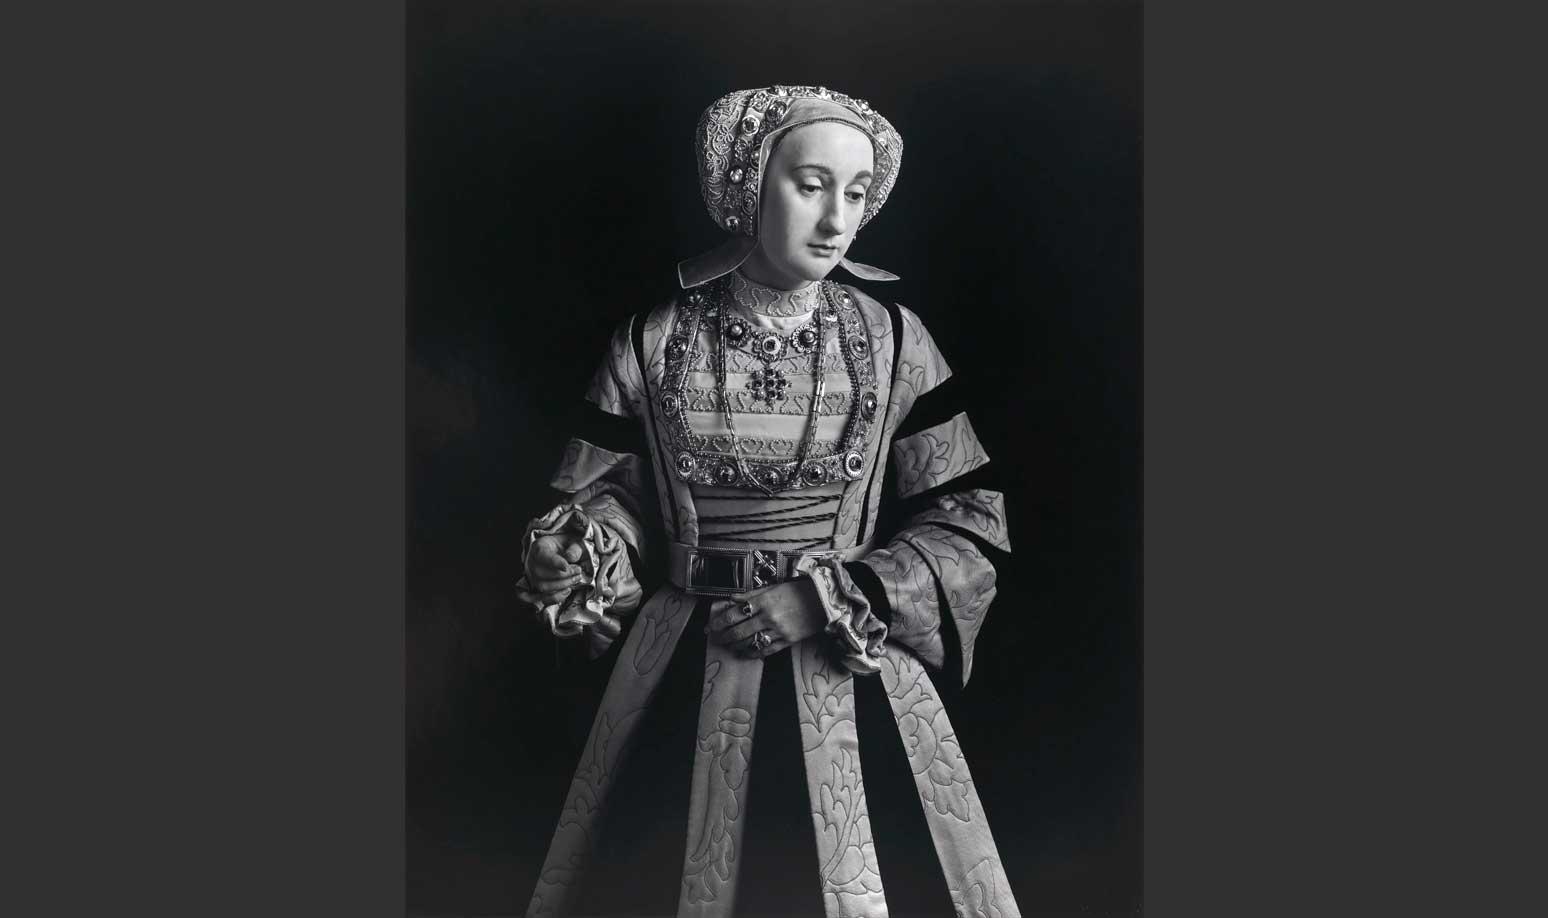 Hiroshi Sugimoto, Anne of Cleves, 1999